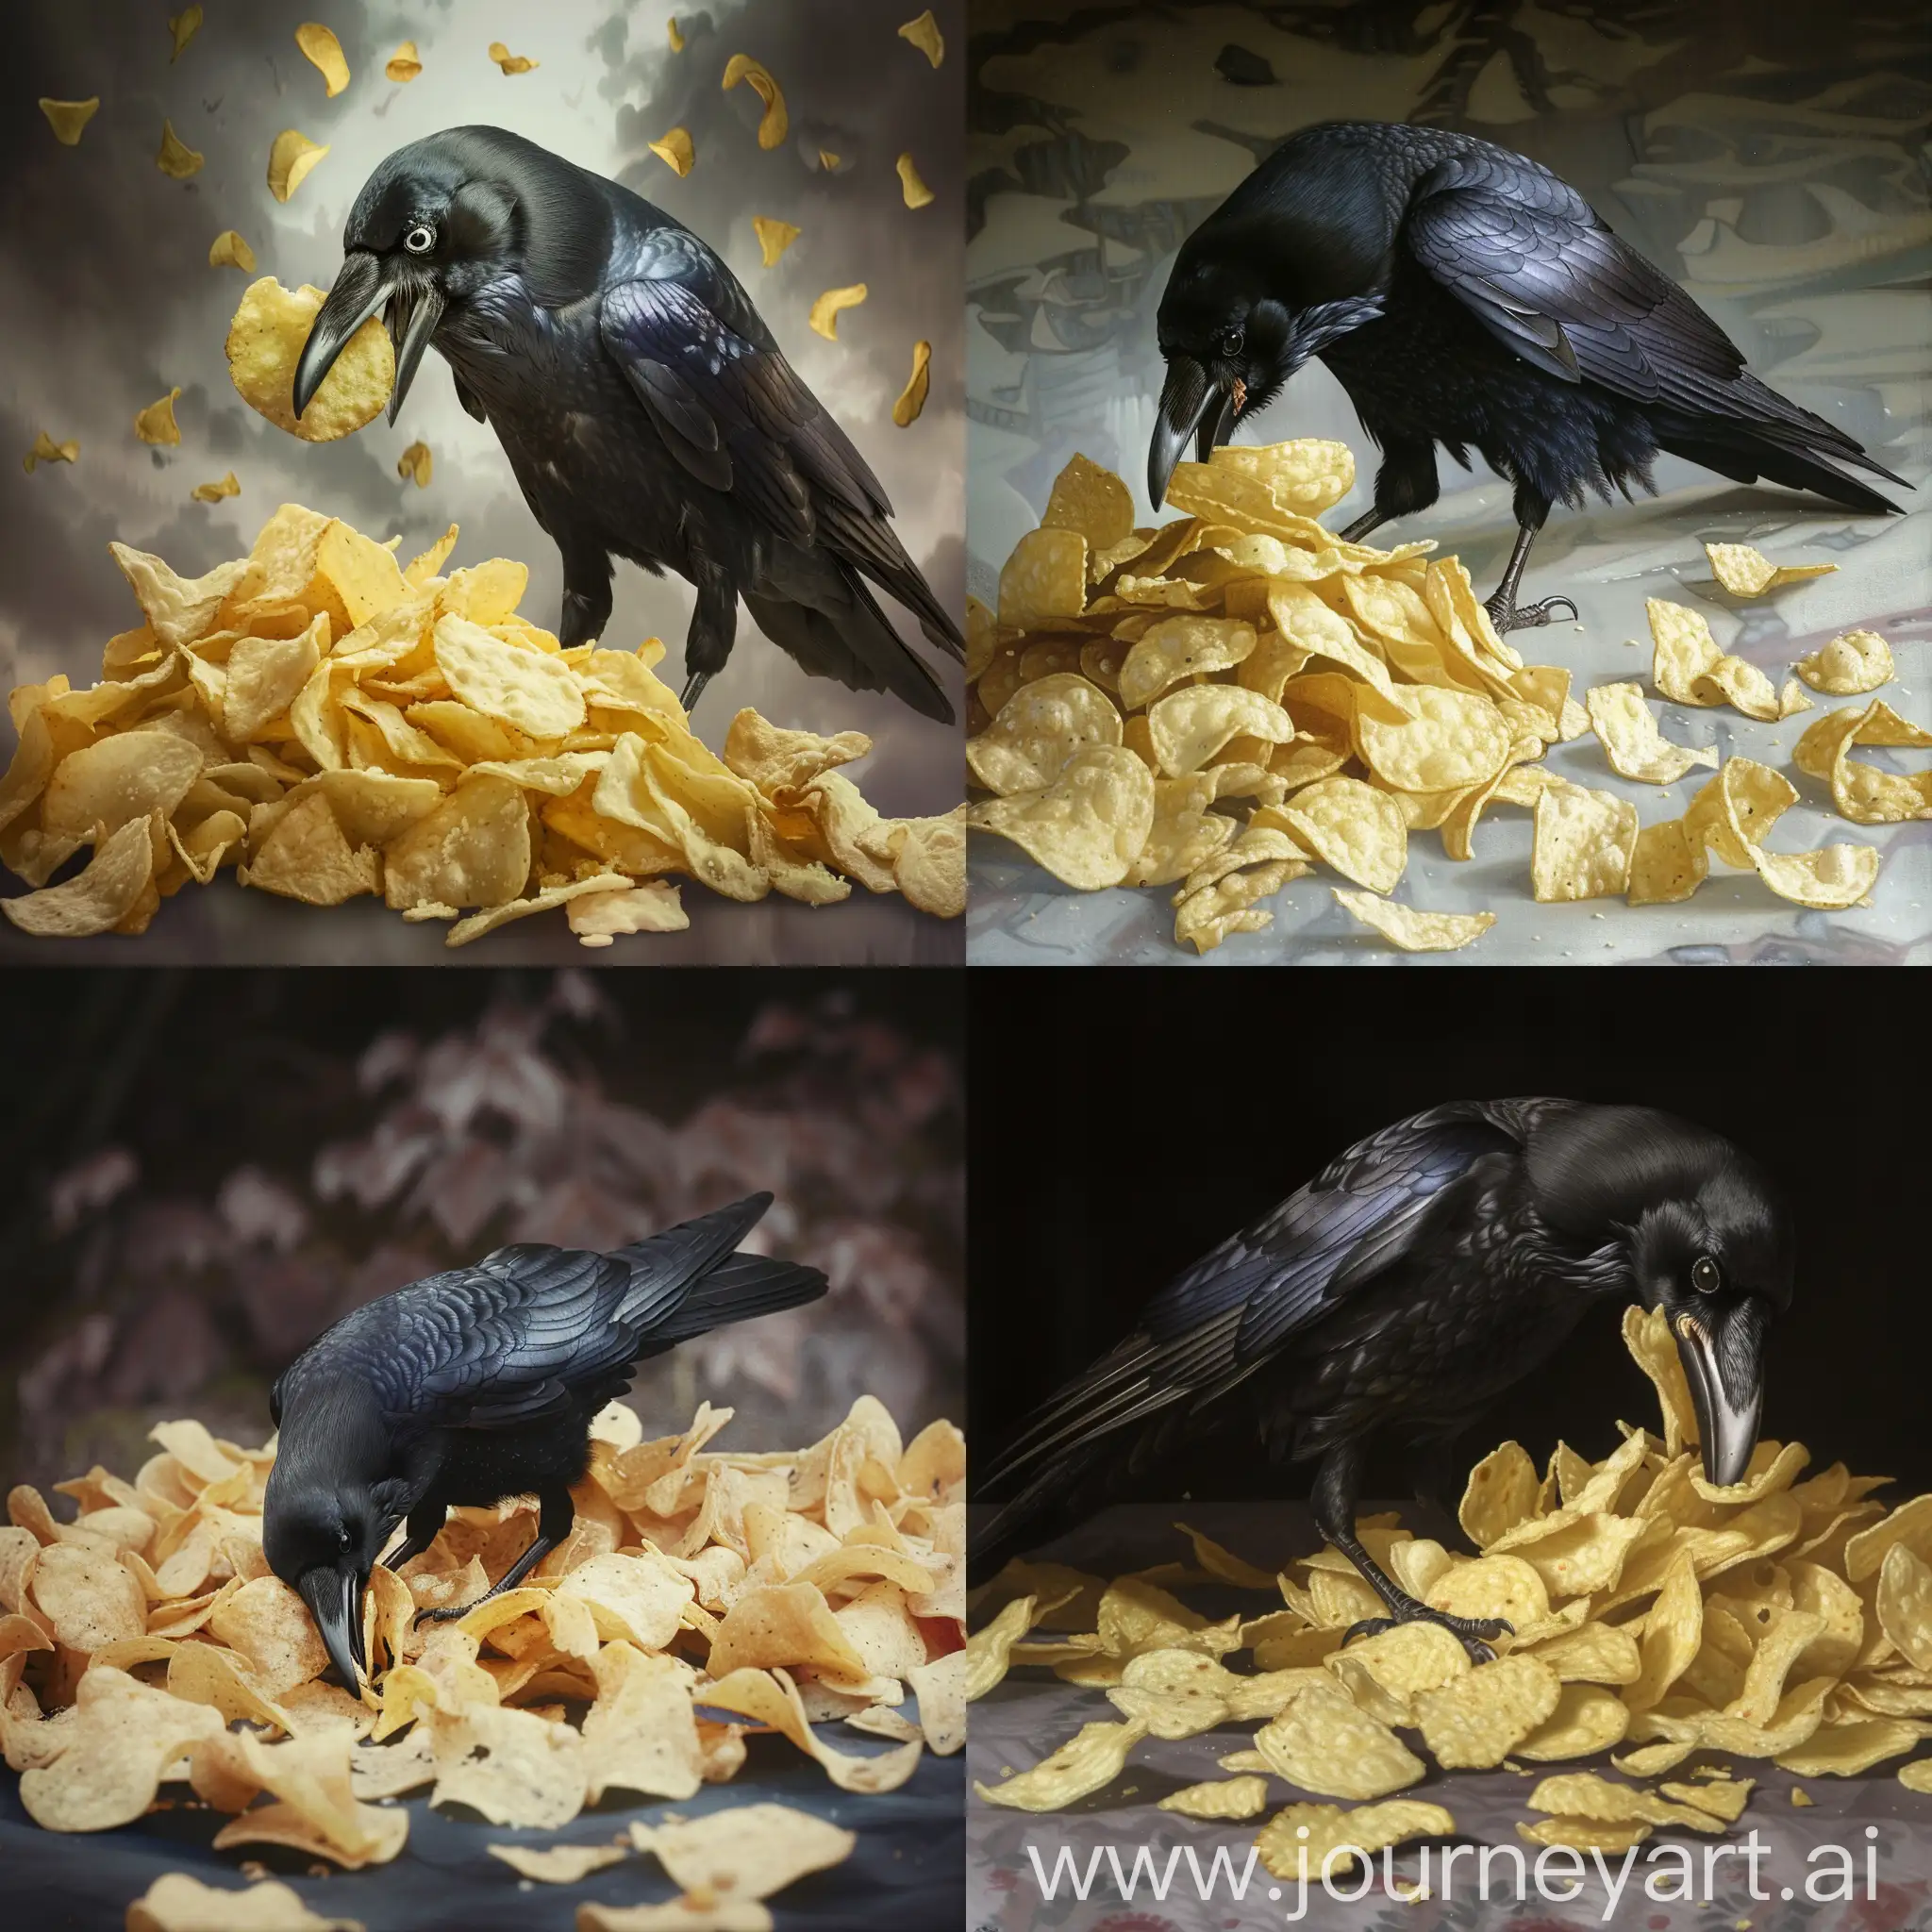 Here's the image of a crow eating chips in a realistic setting.